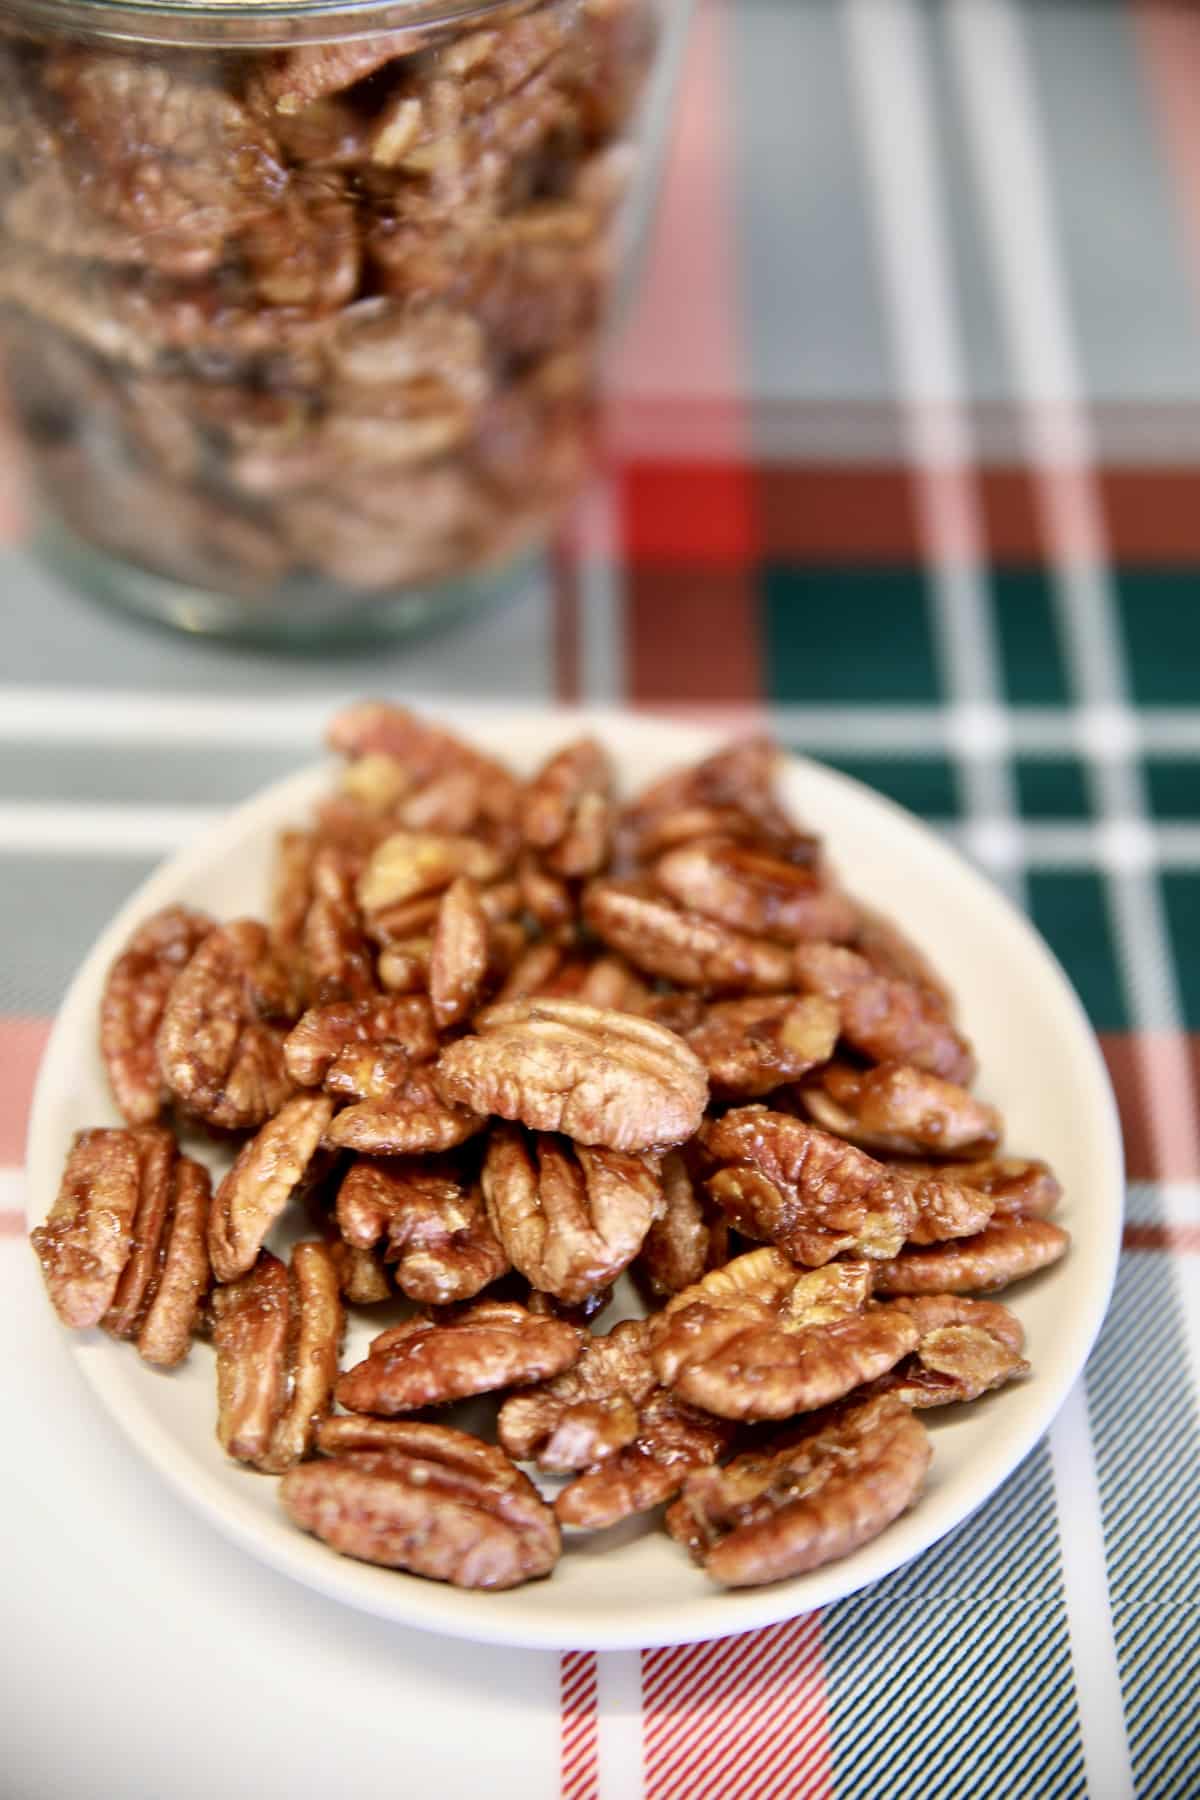 Bowl of candied pecans, jar in background.